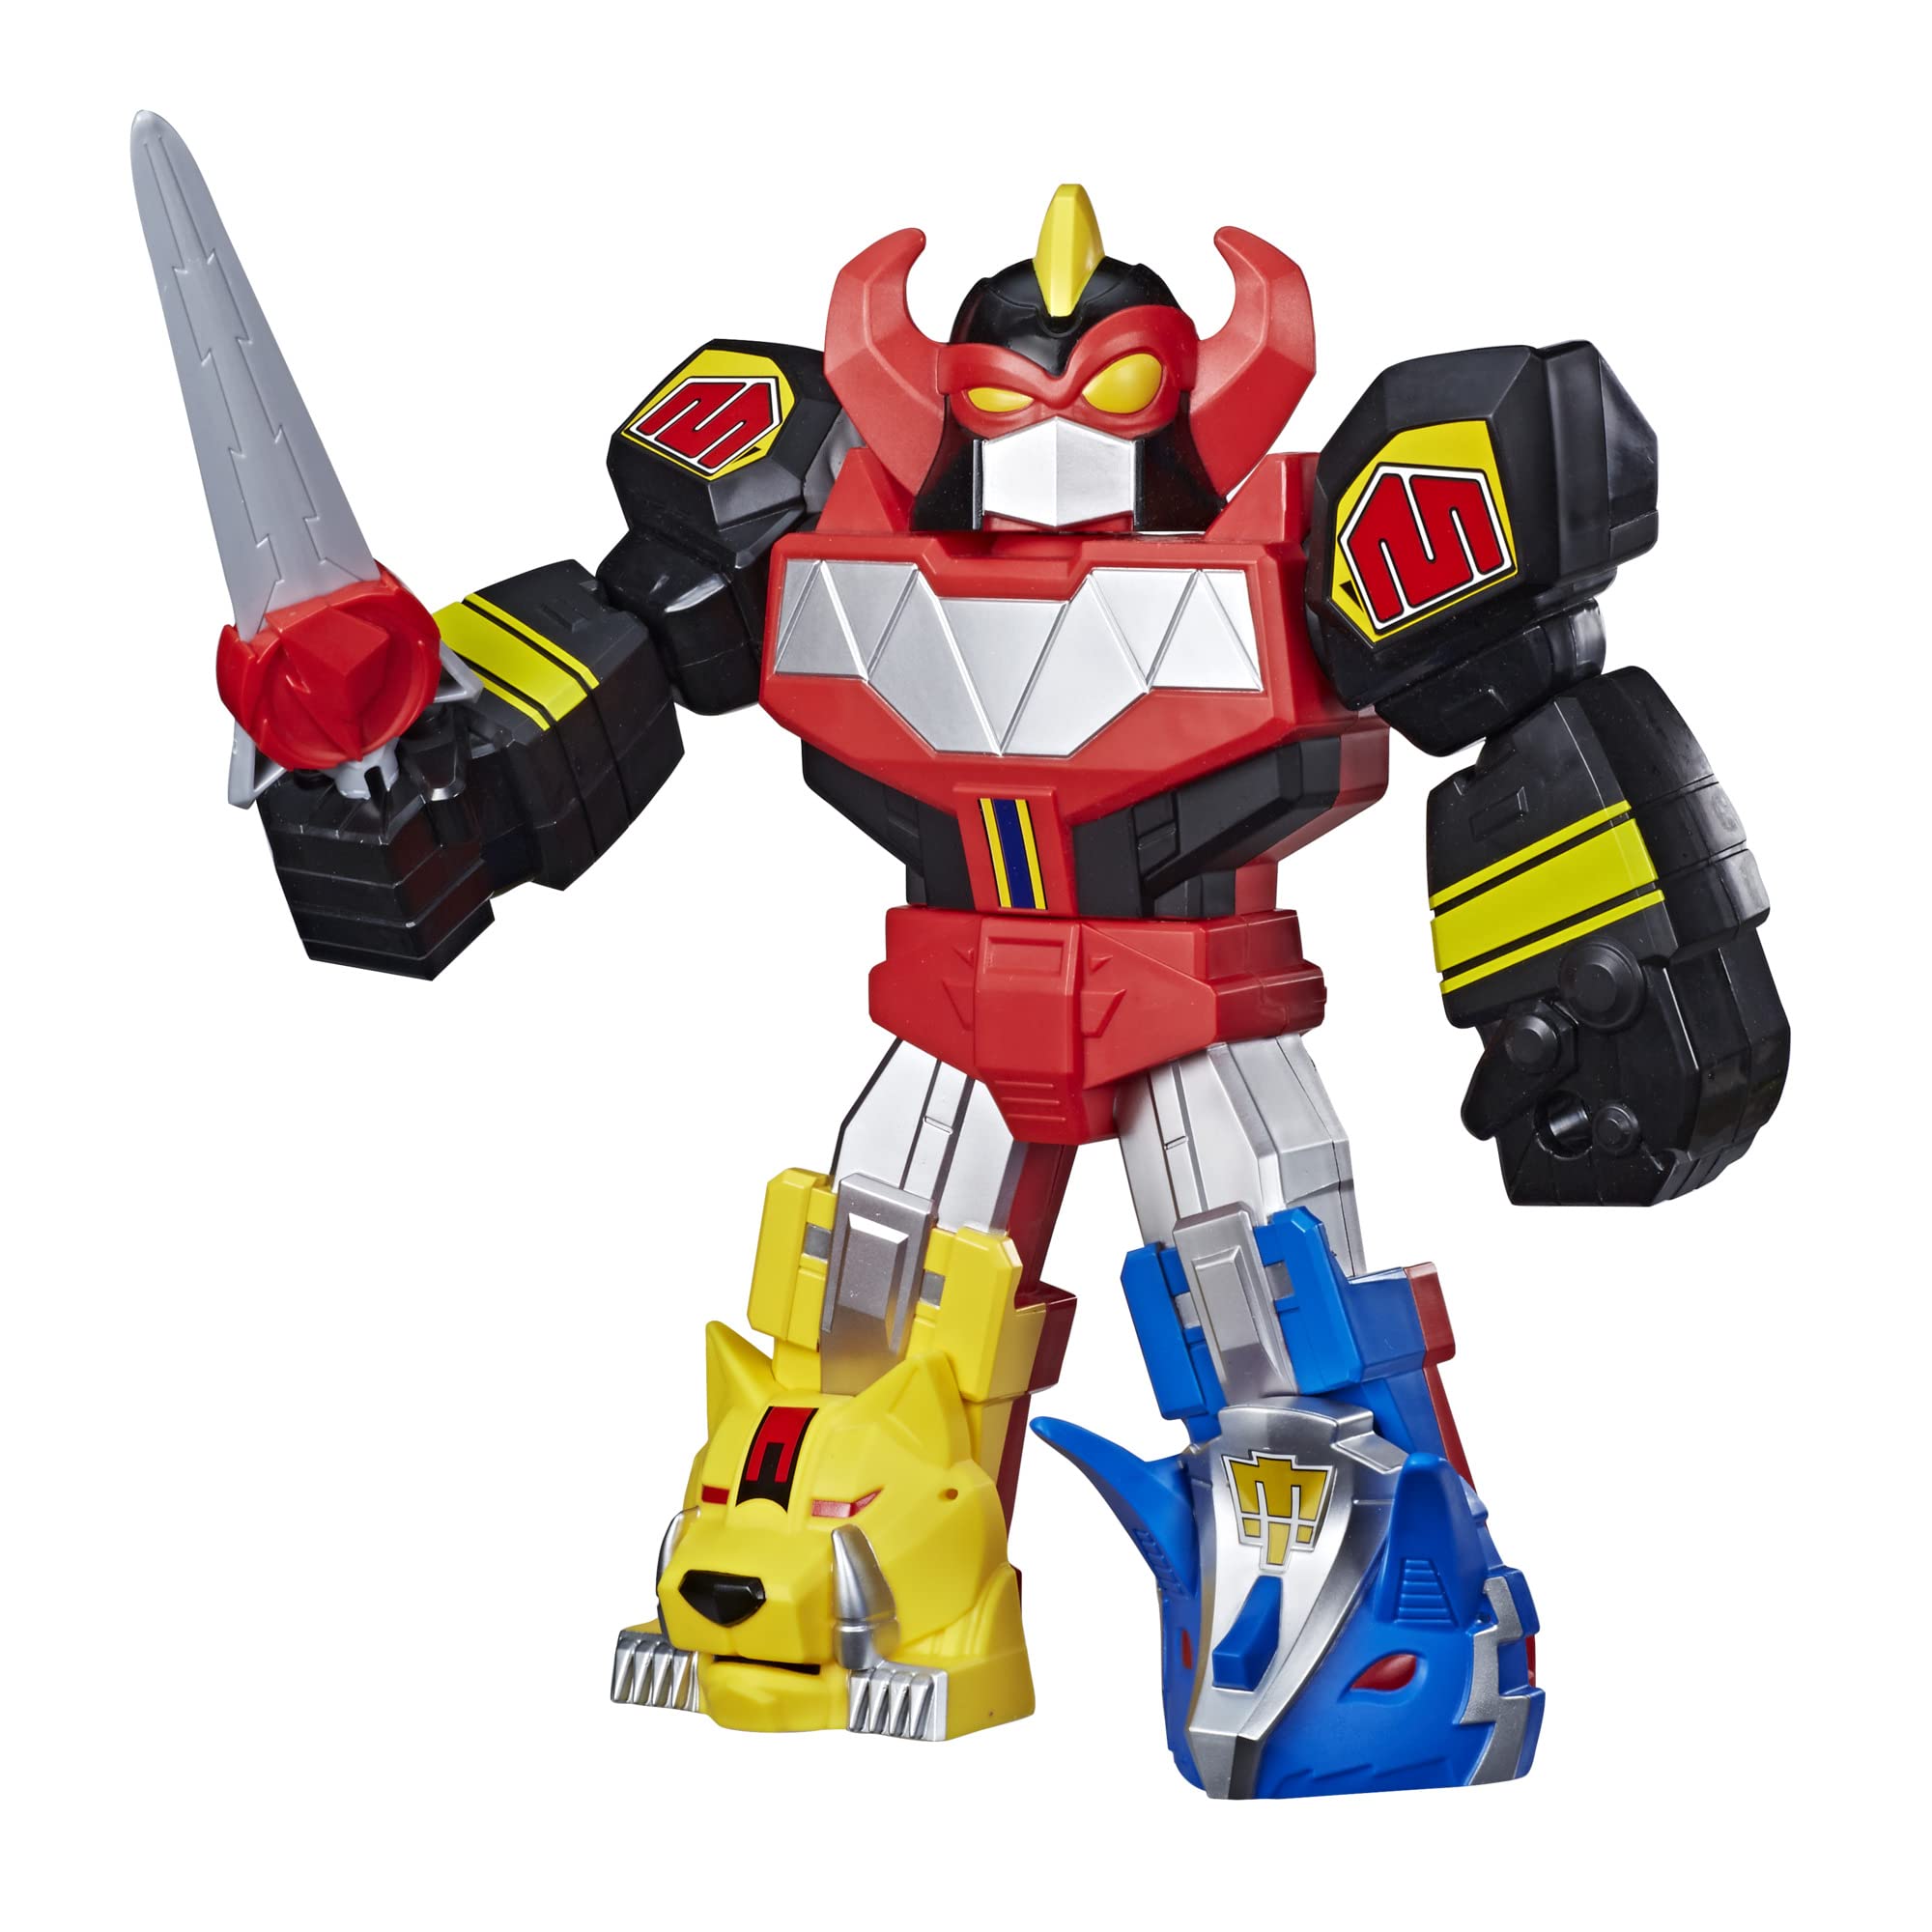 Power Rangers playskool heroes mega mighties power rangers megazord action figure, 12-inch mighty morphin power rangers toy for kids ages 3